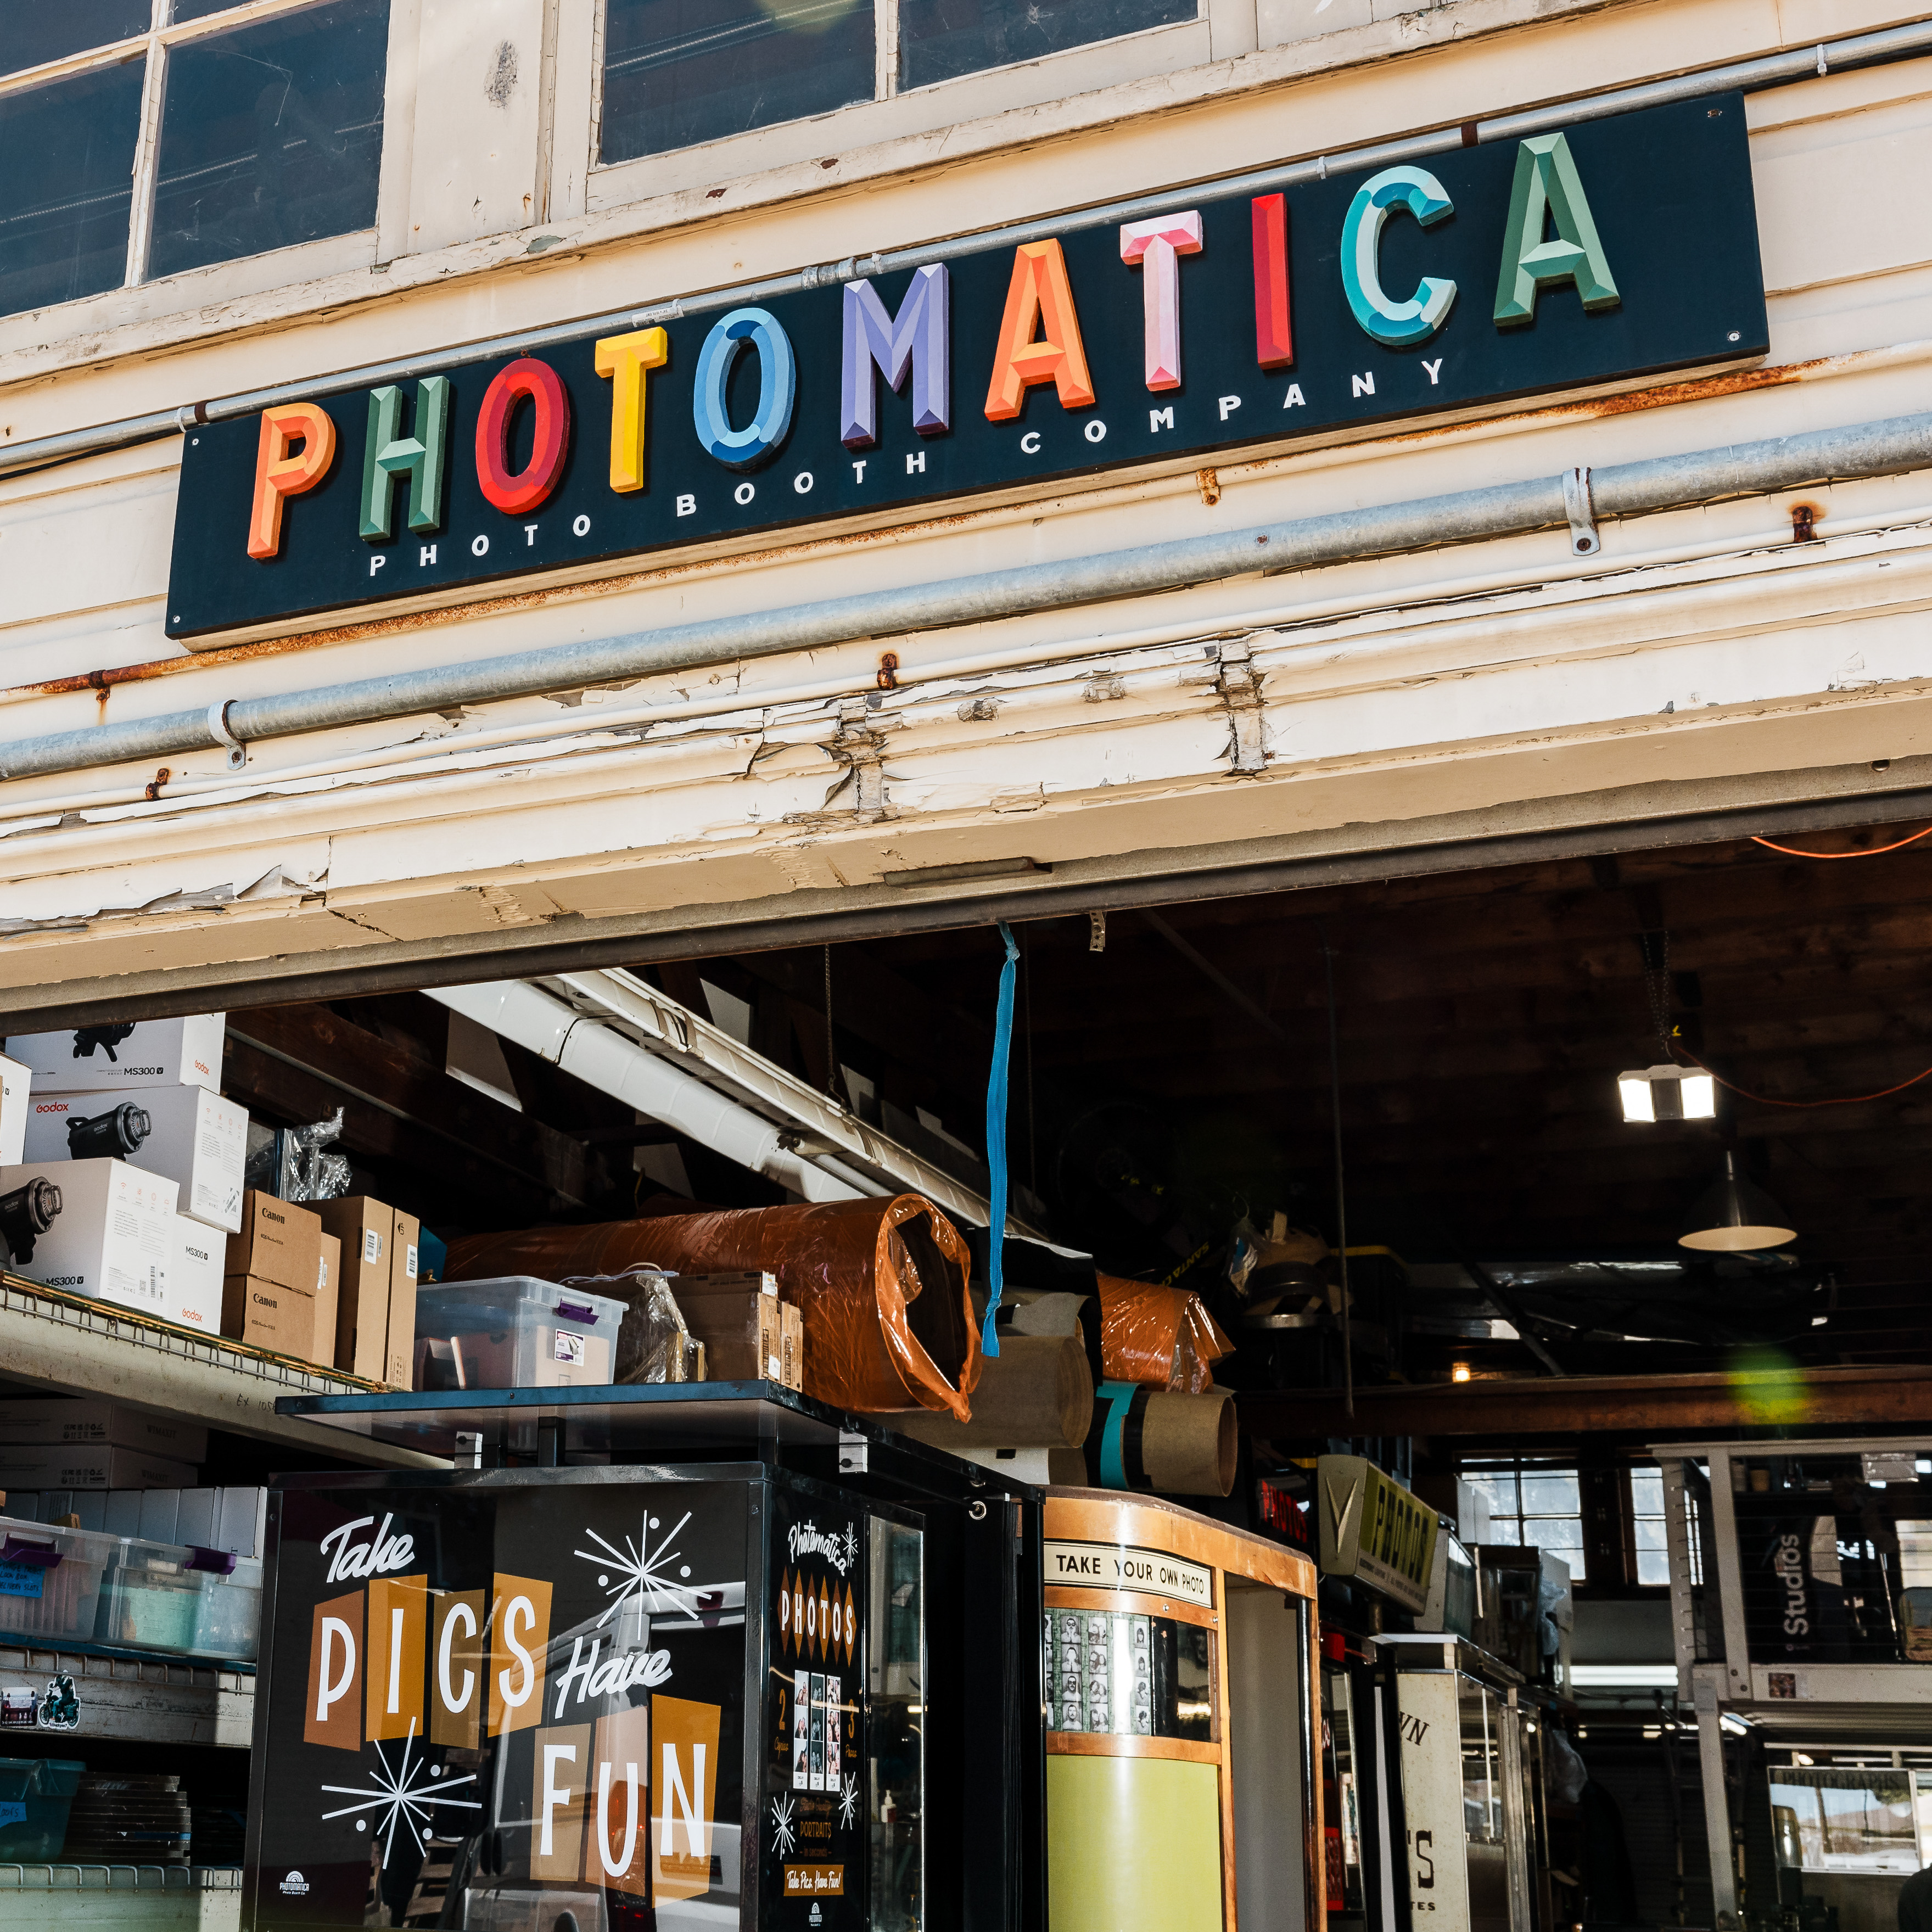 The image shows a store front with a sign that reads &quot;PHOTOMATICA&quot; in colorful letters. Below, there is a photo booth with the words &quot;Take Pics Have Fun.&quot; Various items are stored above.